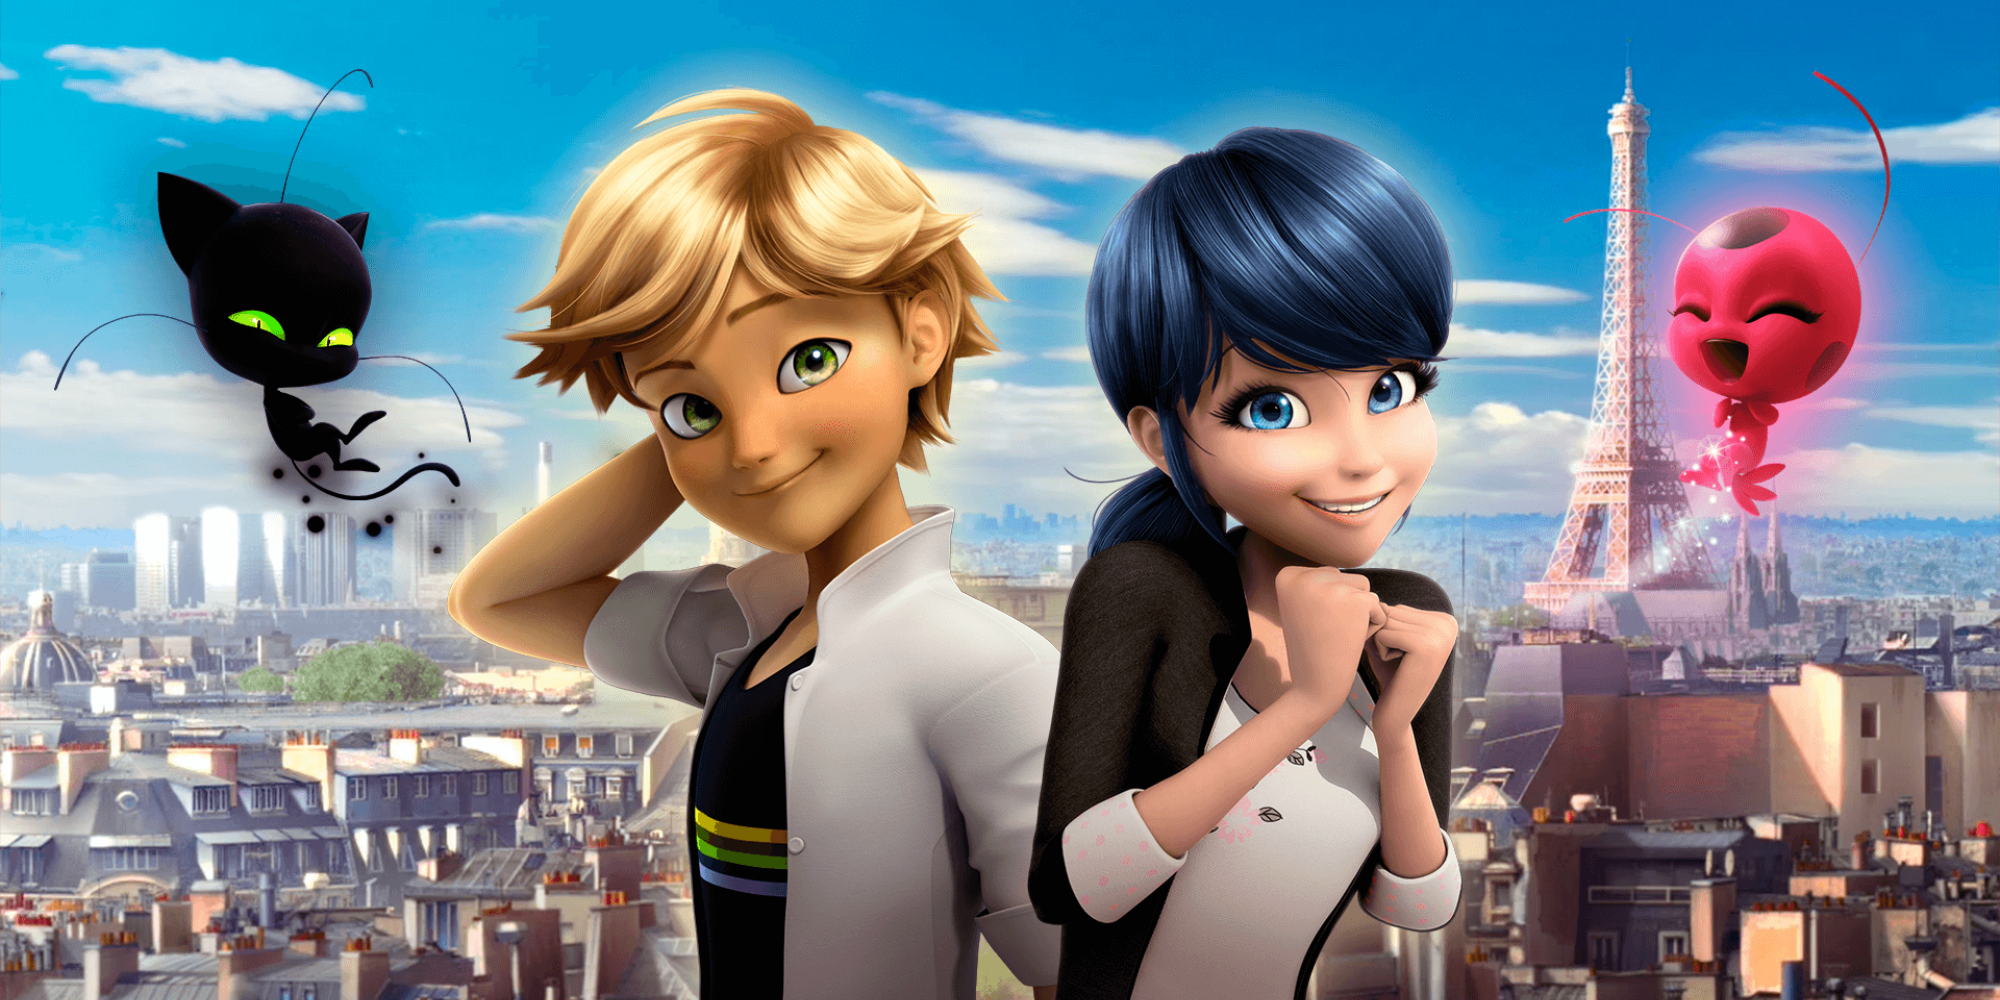 Marinette and Adrien with Plagg and Tiki in artwork from a Miraculous Ladybug title card